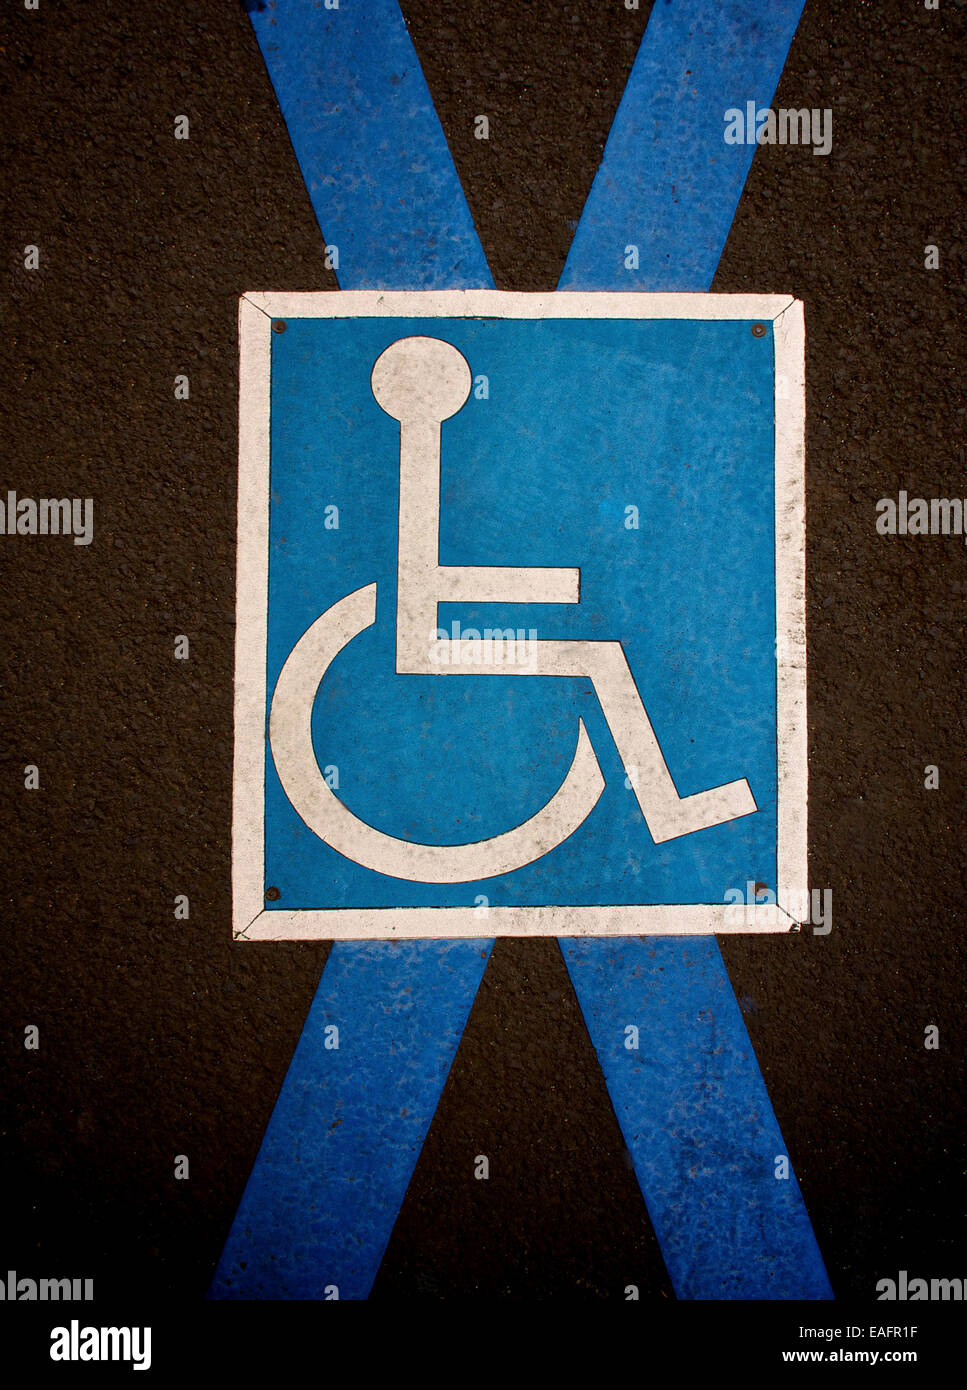 Pictogram handicapped parking on pavement. France. Europe. Stock Photo